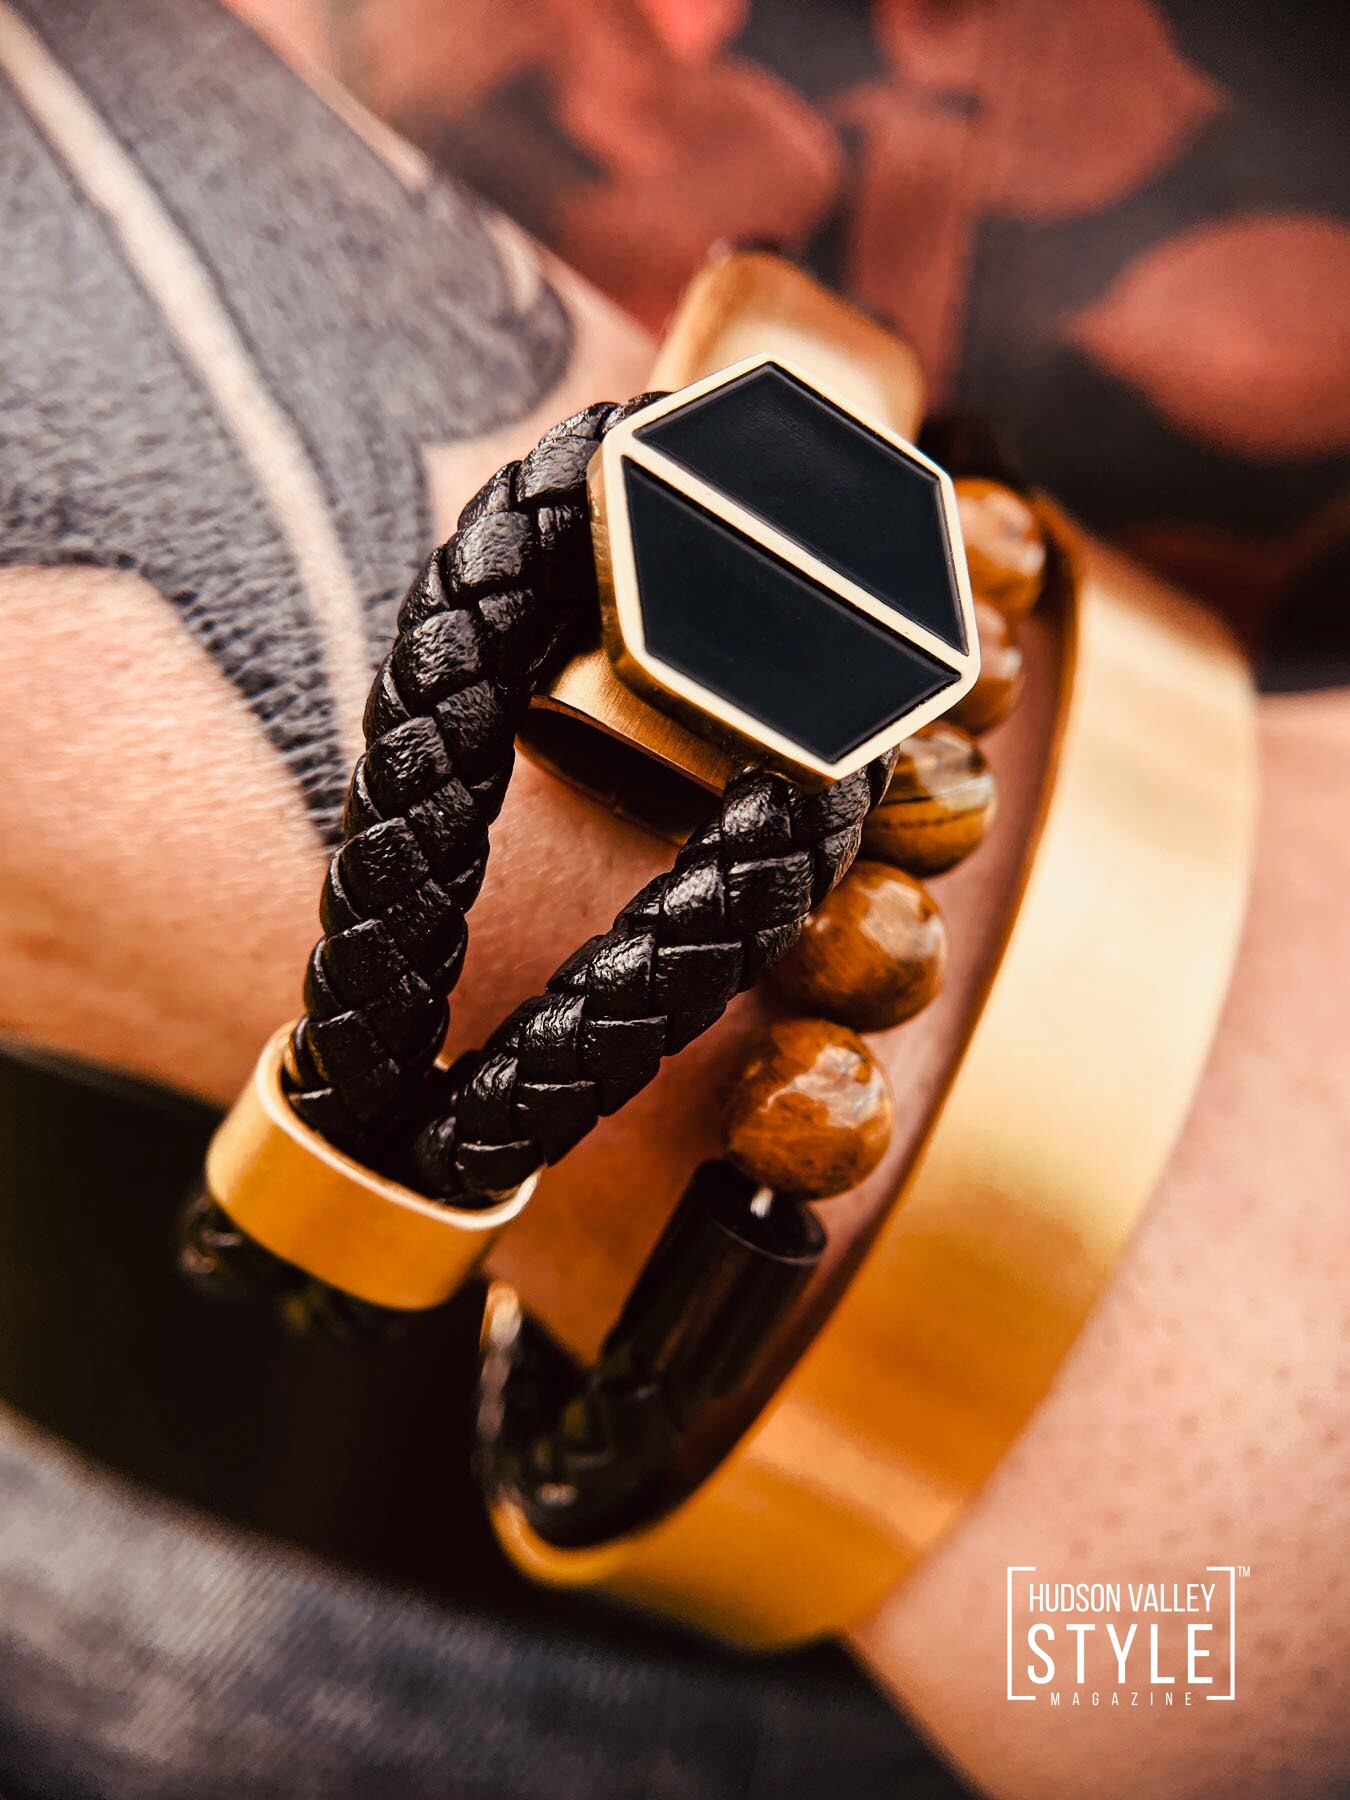 Top 5 Men's Fashion Accessories this Spring – Accessories for Men – Presented by HARD NEW YORK